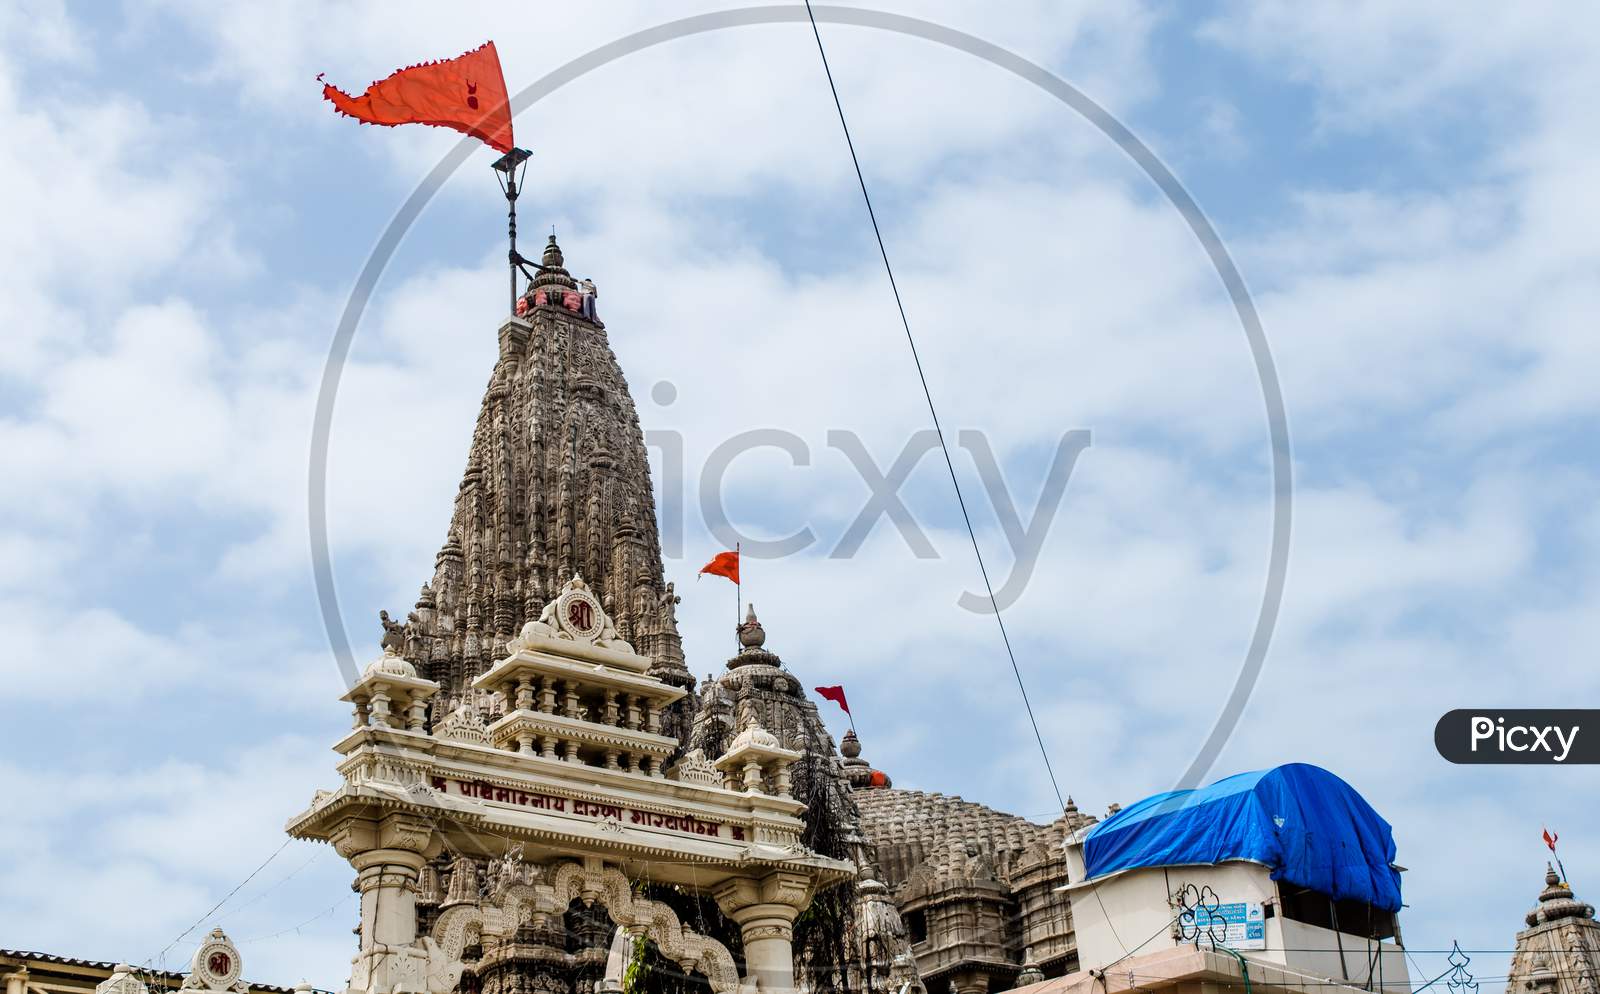 dwarkadhish temple of gujarat is located on the banks of Gomti river